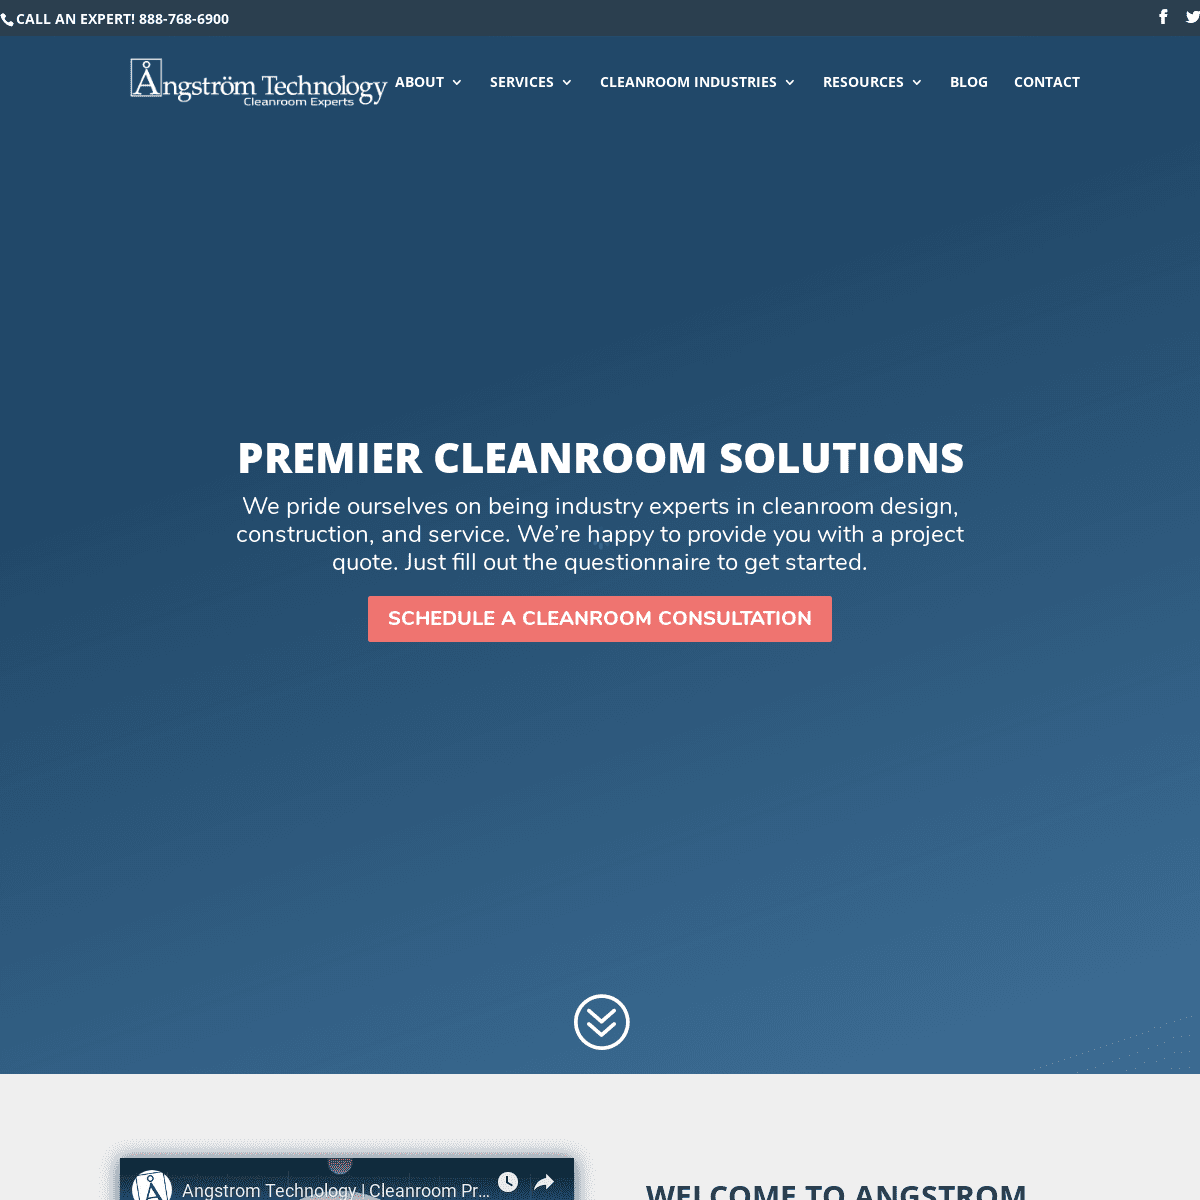 Angstrom Technology - Premier Cleanroom Solutions